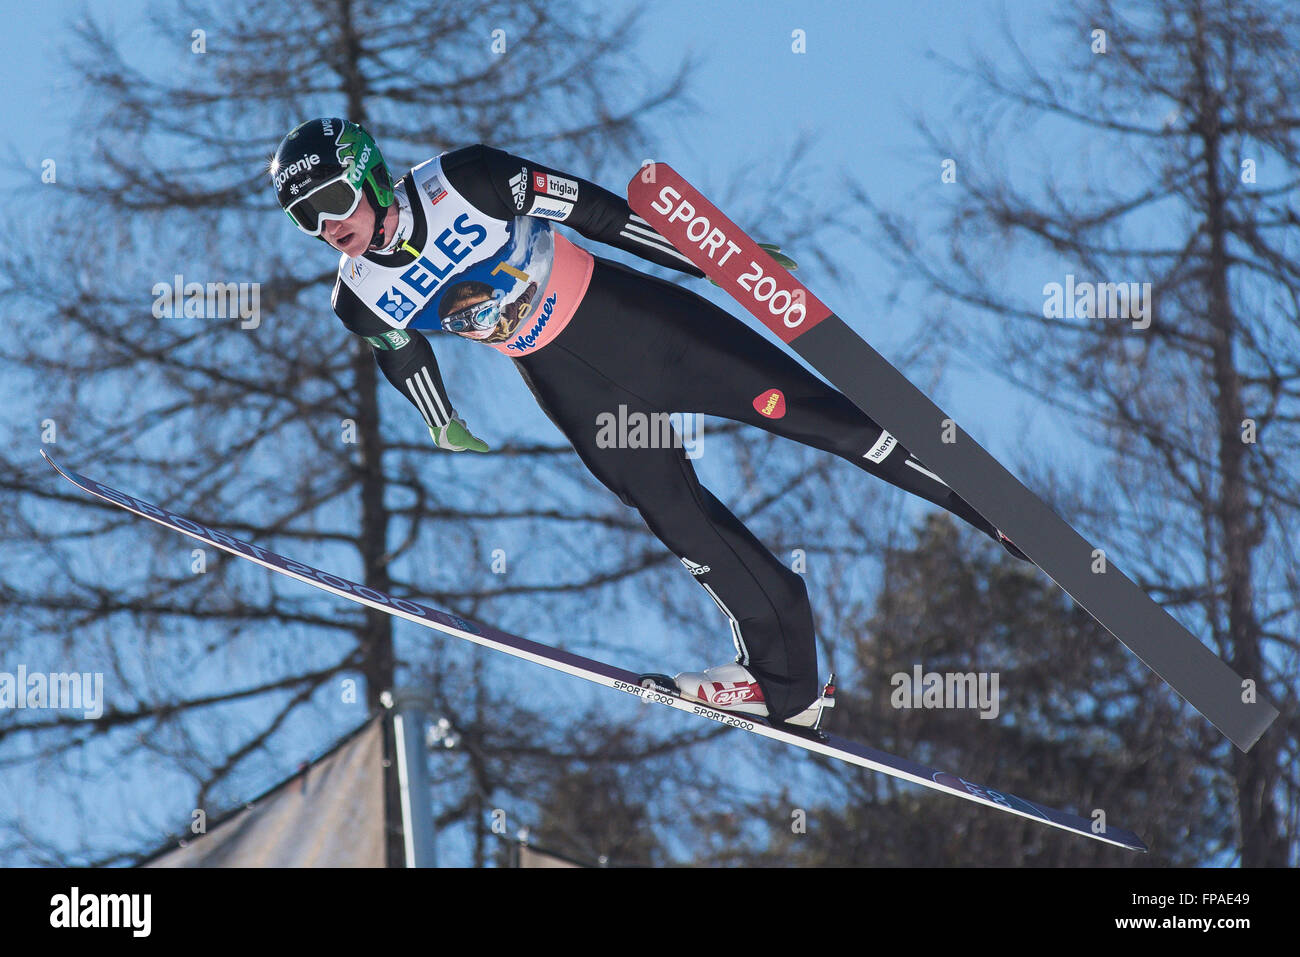 Planica, Slovenia. 18th Mar, 2016. Mitja Meznar of Slovenia competes during Planica FIS Ski Jumping World Cup finals on the March 18, 2016 in Planica, Slovenia. © Rok Rakun/Pacific Press/Alamy Live News Stock Photo